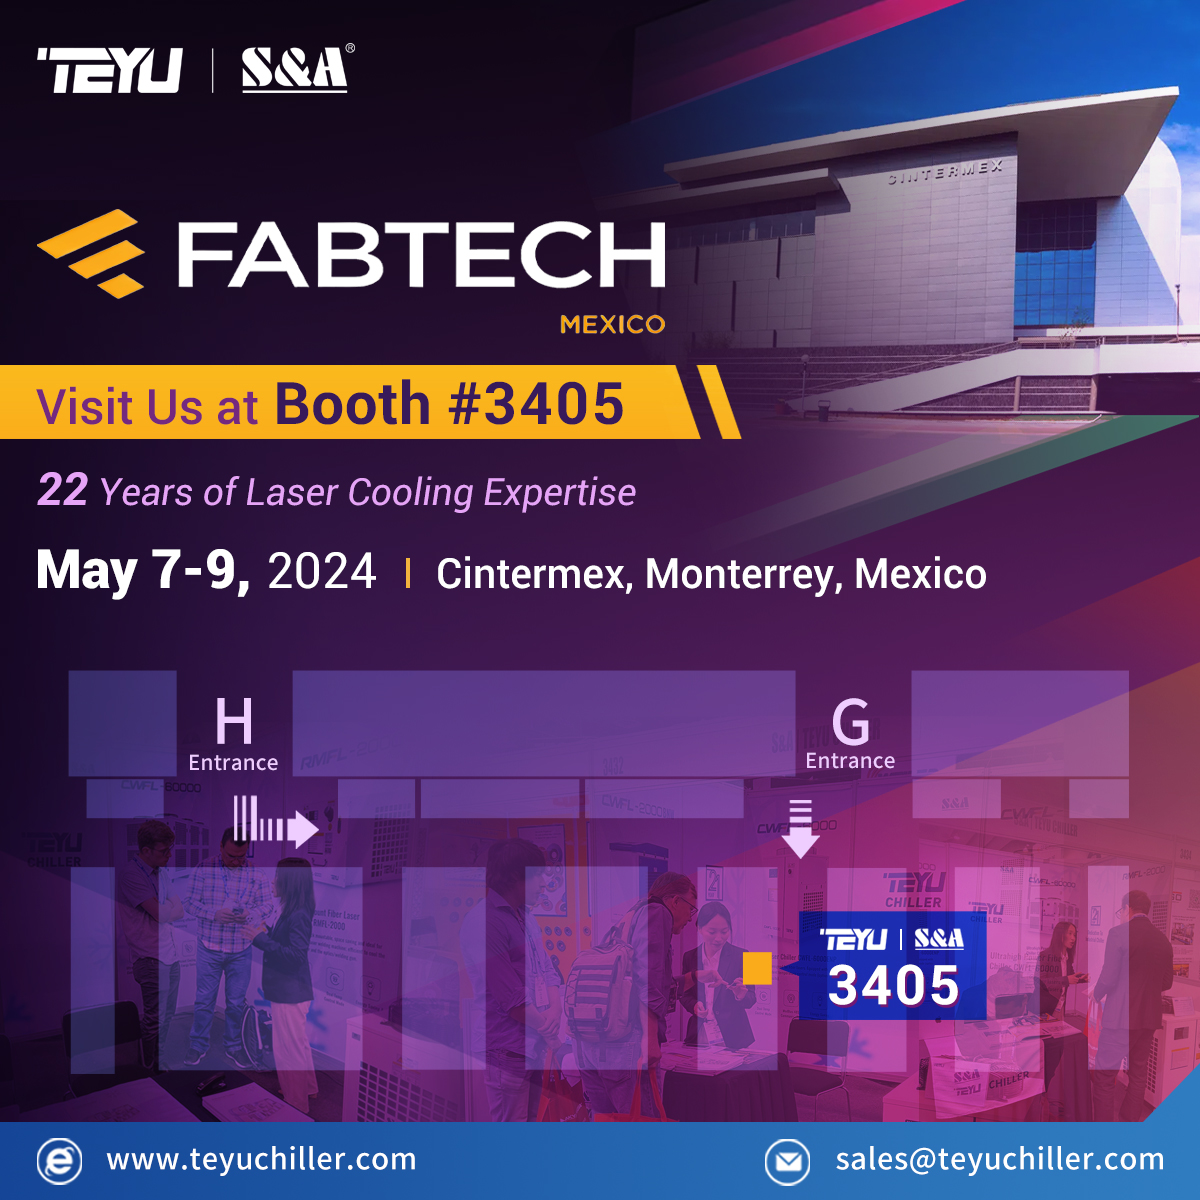 😃The 4th Stop of 2024 TEYU Global Exhibitions - FABTECH Mexico!
Looking forward to your visit at our BOOTH #3405 from May 7-9, where you can discover how our innovative cooling solutions can resolve the overheating challenges for your equipment.
More at teyuchiller.com/products👈